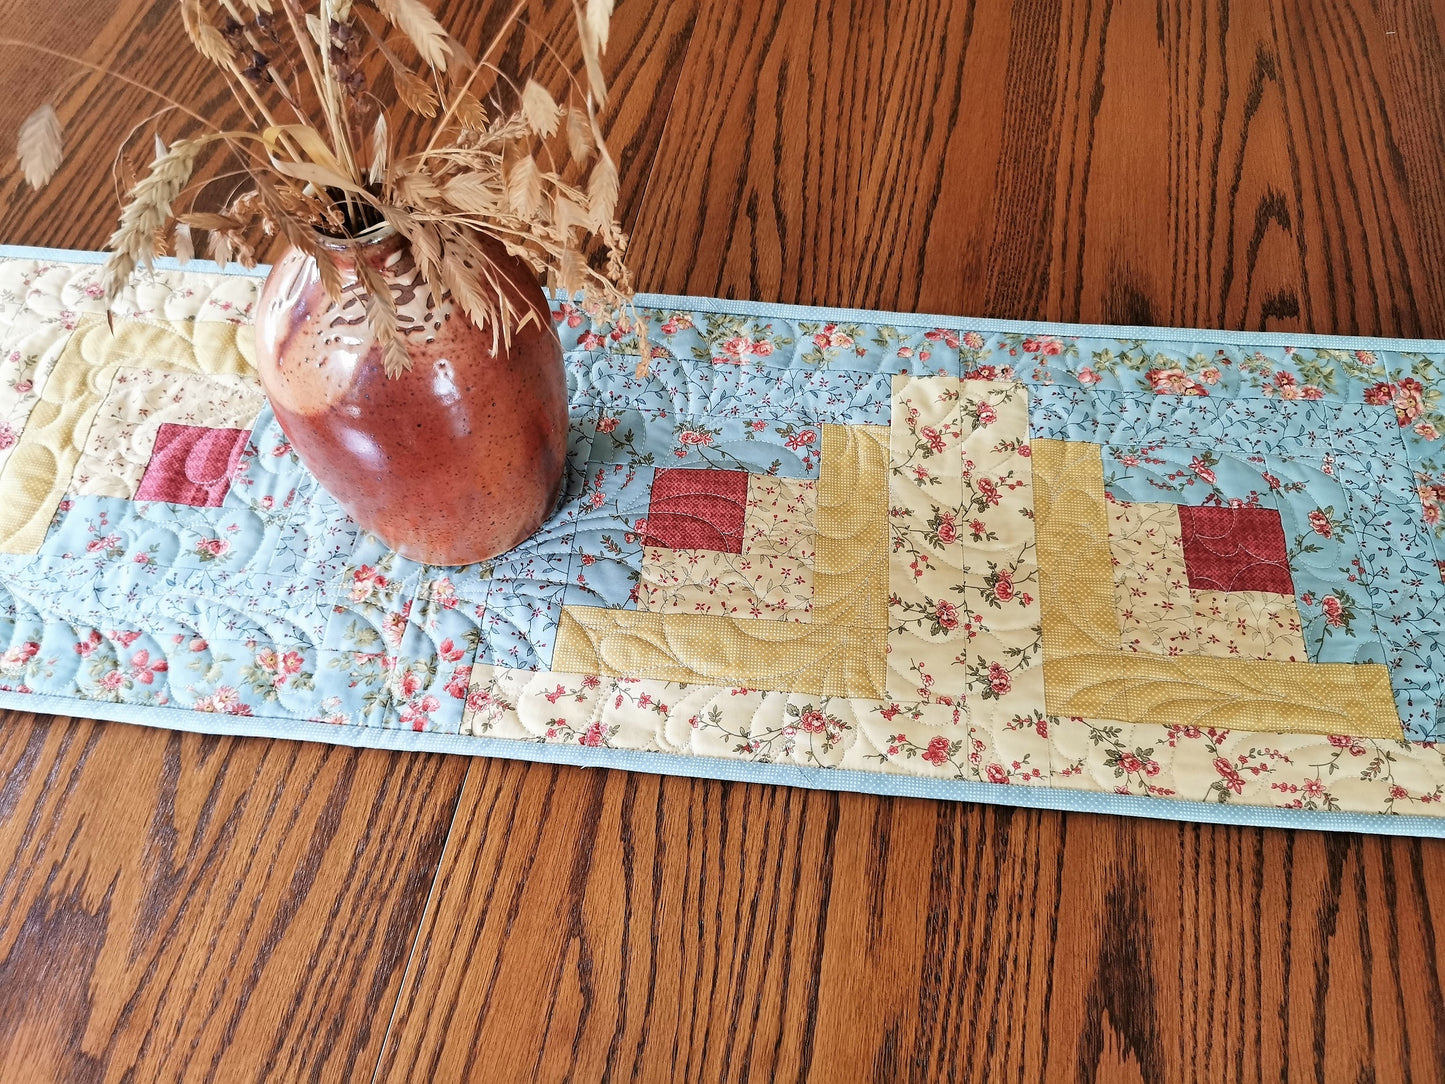 This pretty floral log cabin table runner is done in a soft teal blues and golden yellows with a touch of coral pink. Very pretty.